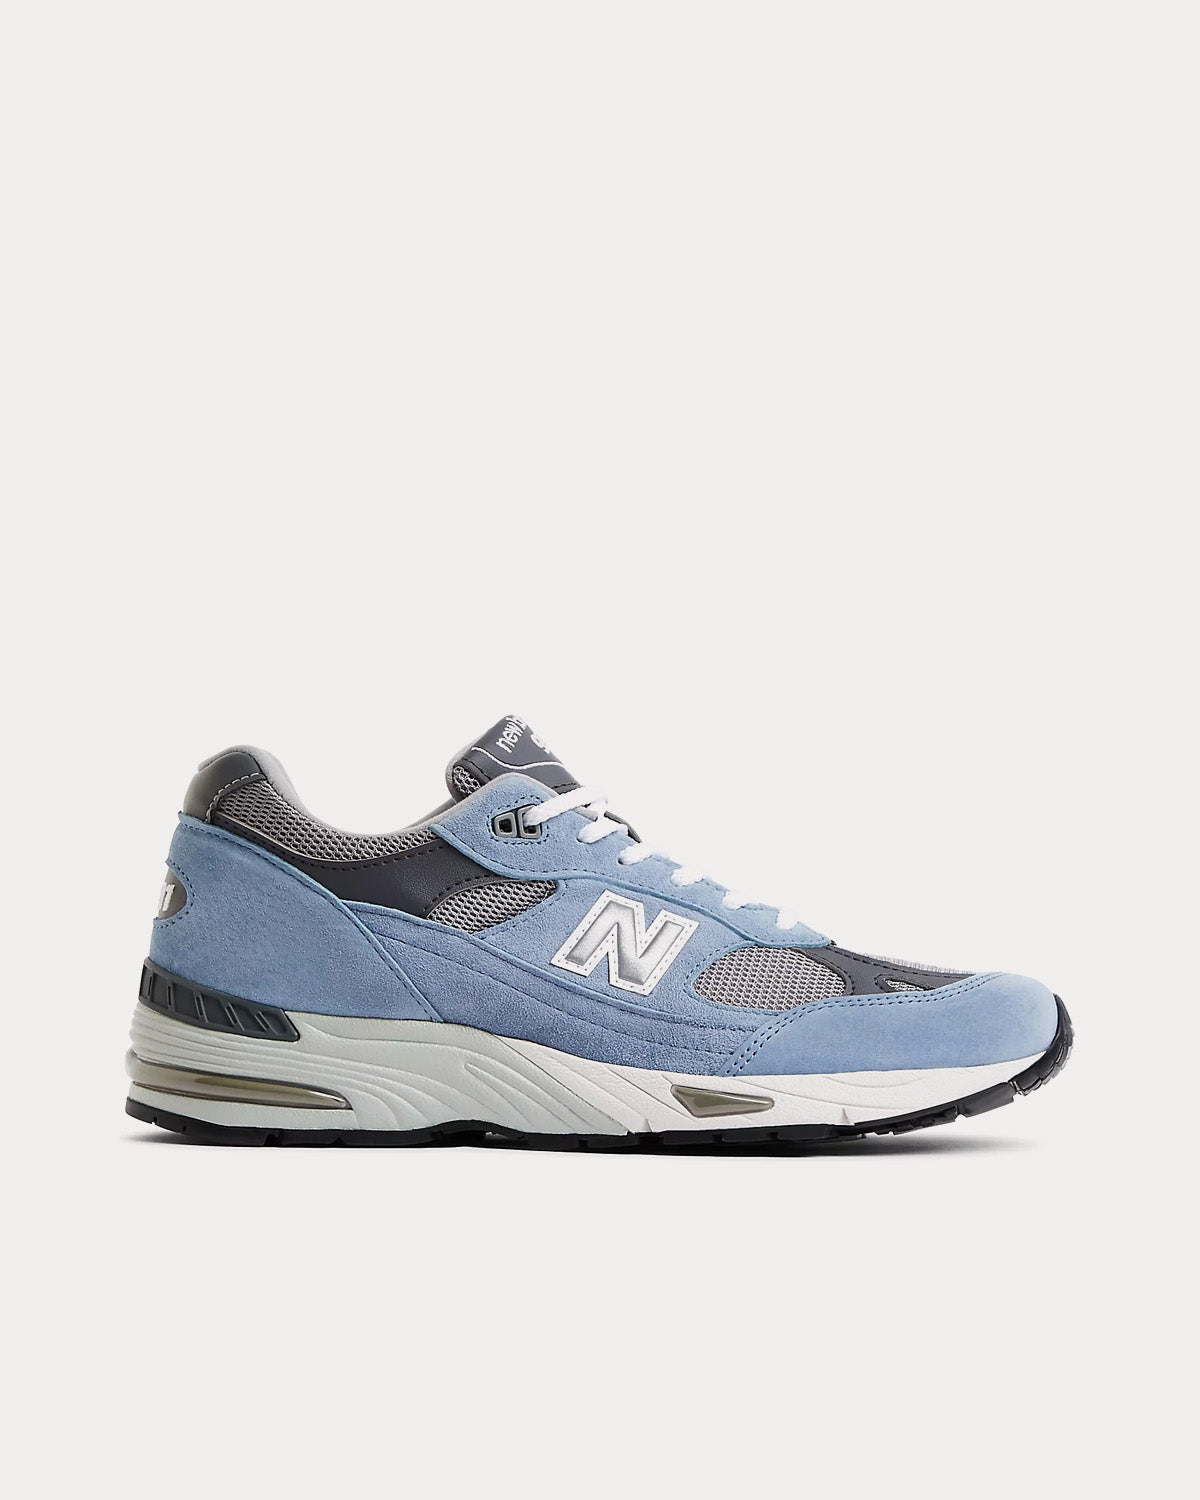 New Balance Made in UK 991v1 Dusty Blue / Alloy / Smoked Pearl Low Top ...